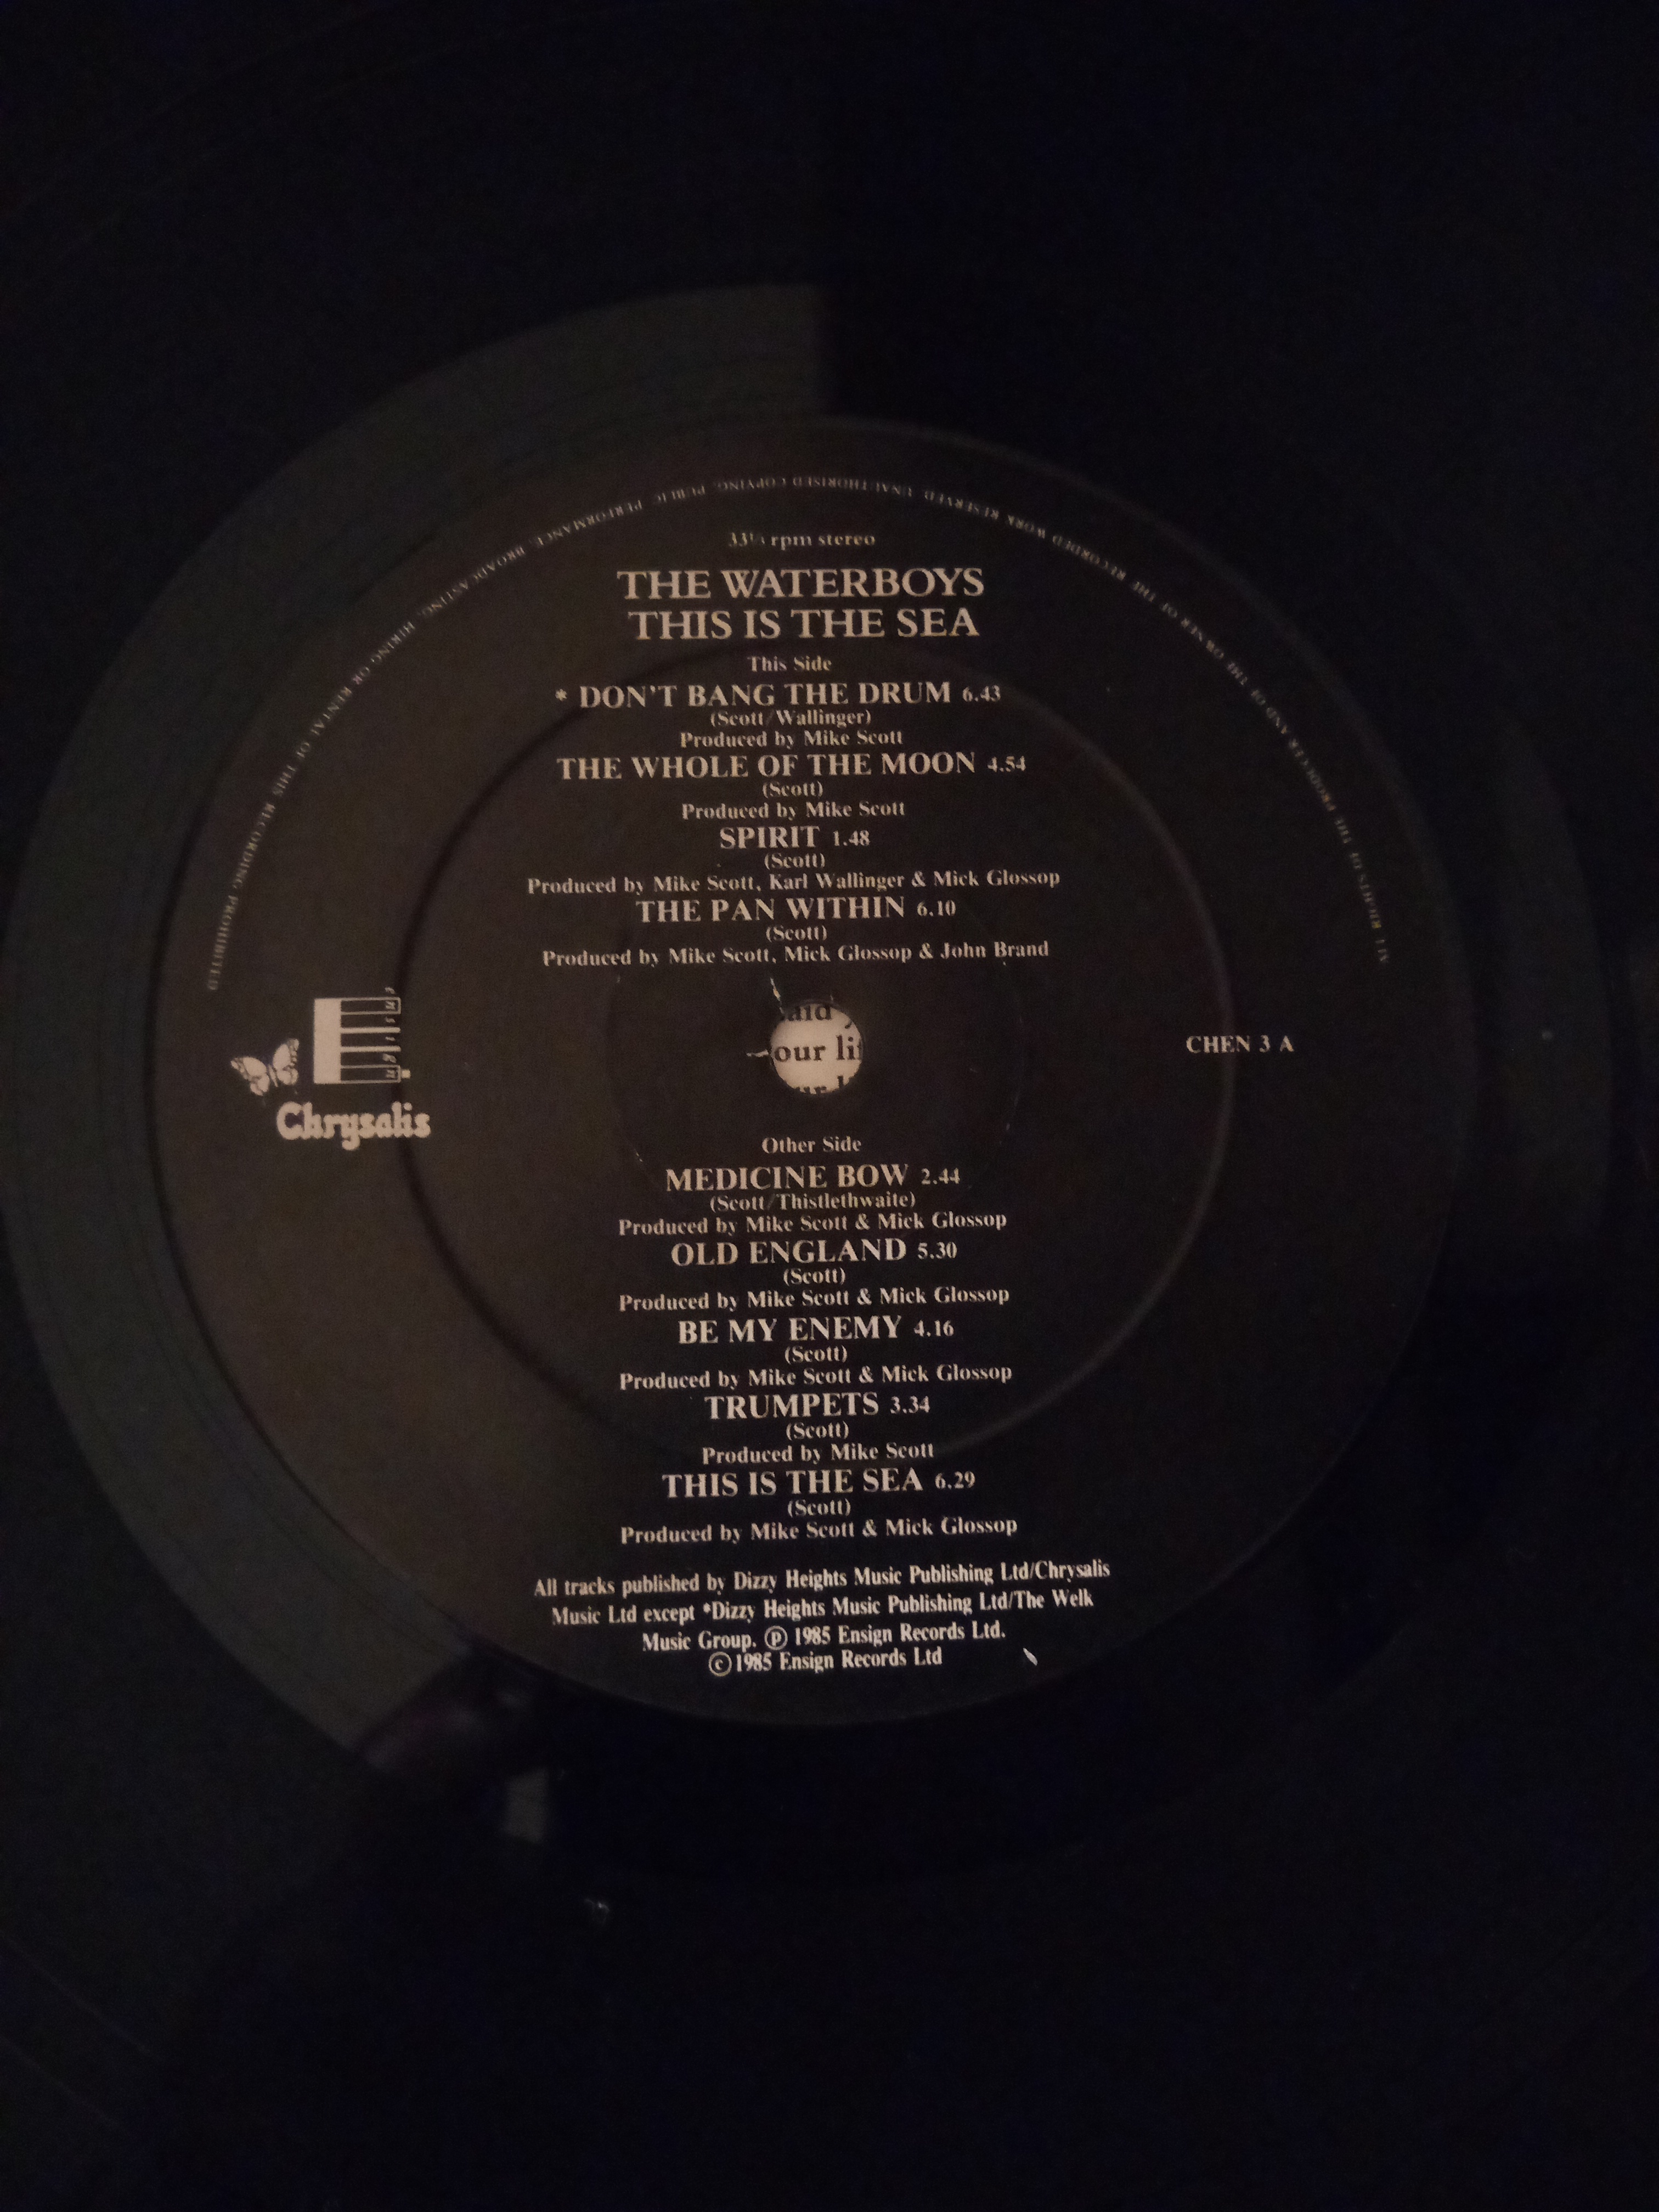 The Waterboys - This Is The Sea - Chen 3 - Excellent Condition. (P) - Image 7 of 7